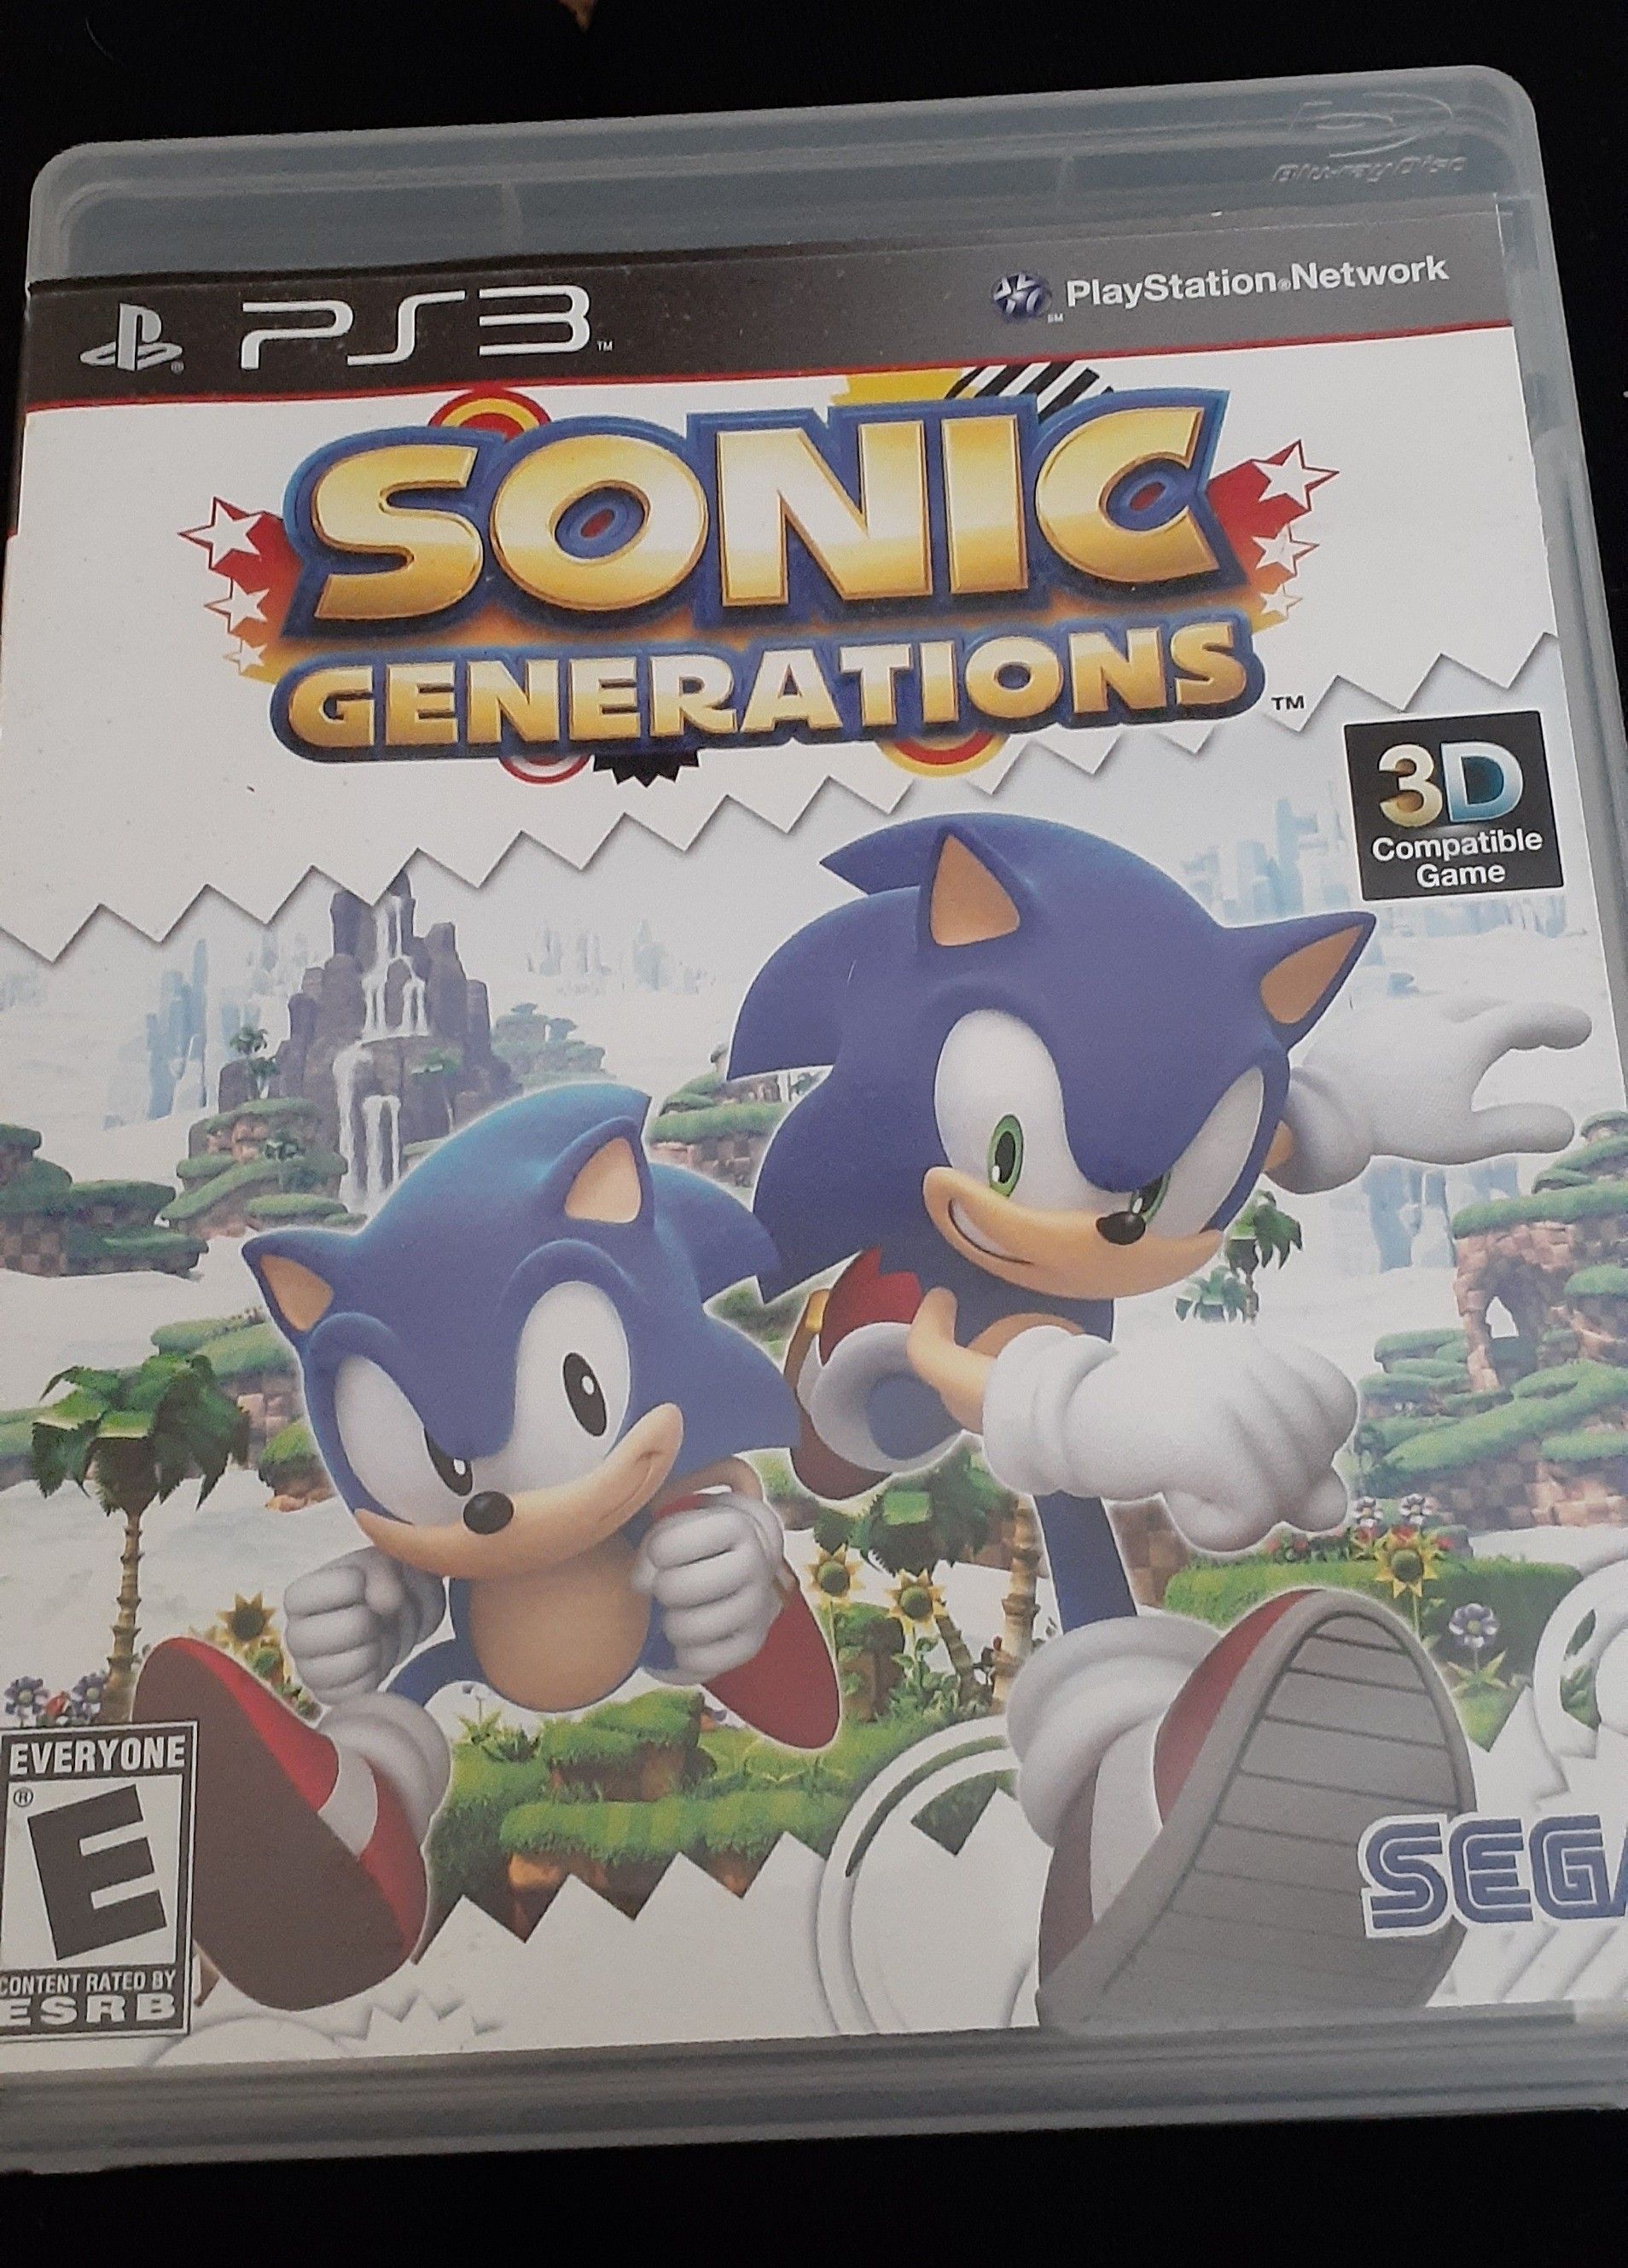 Sonic Generations (PS3) $12 or Best Offer